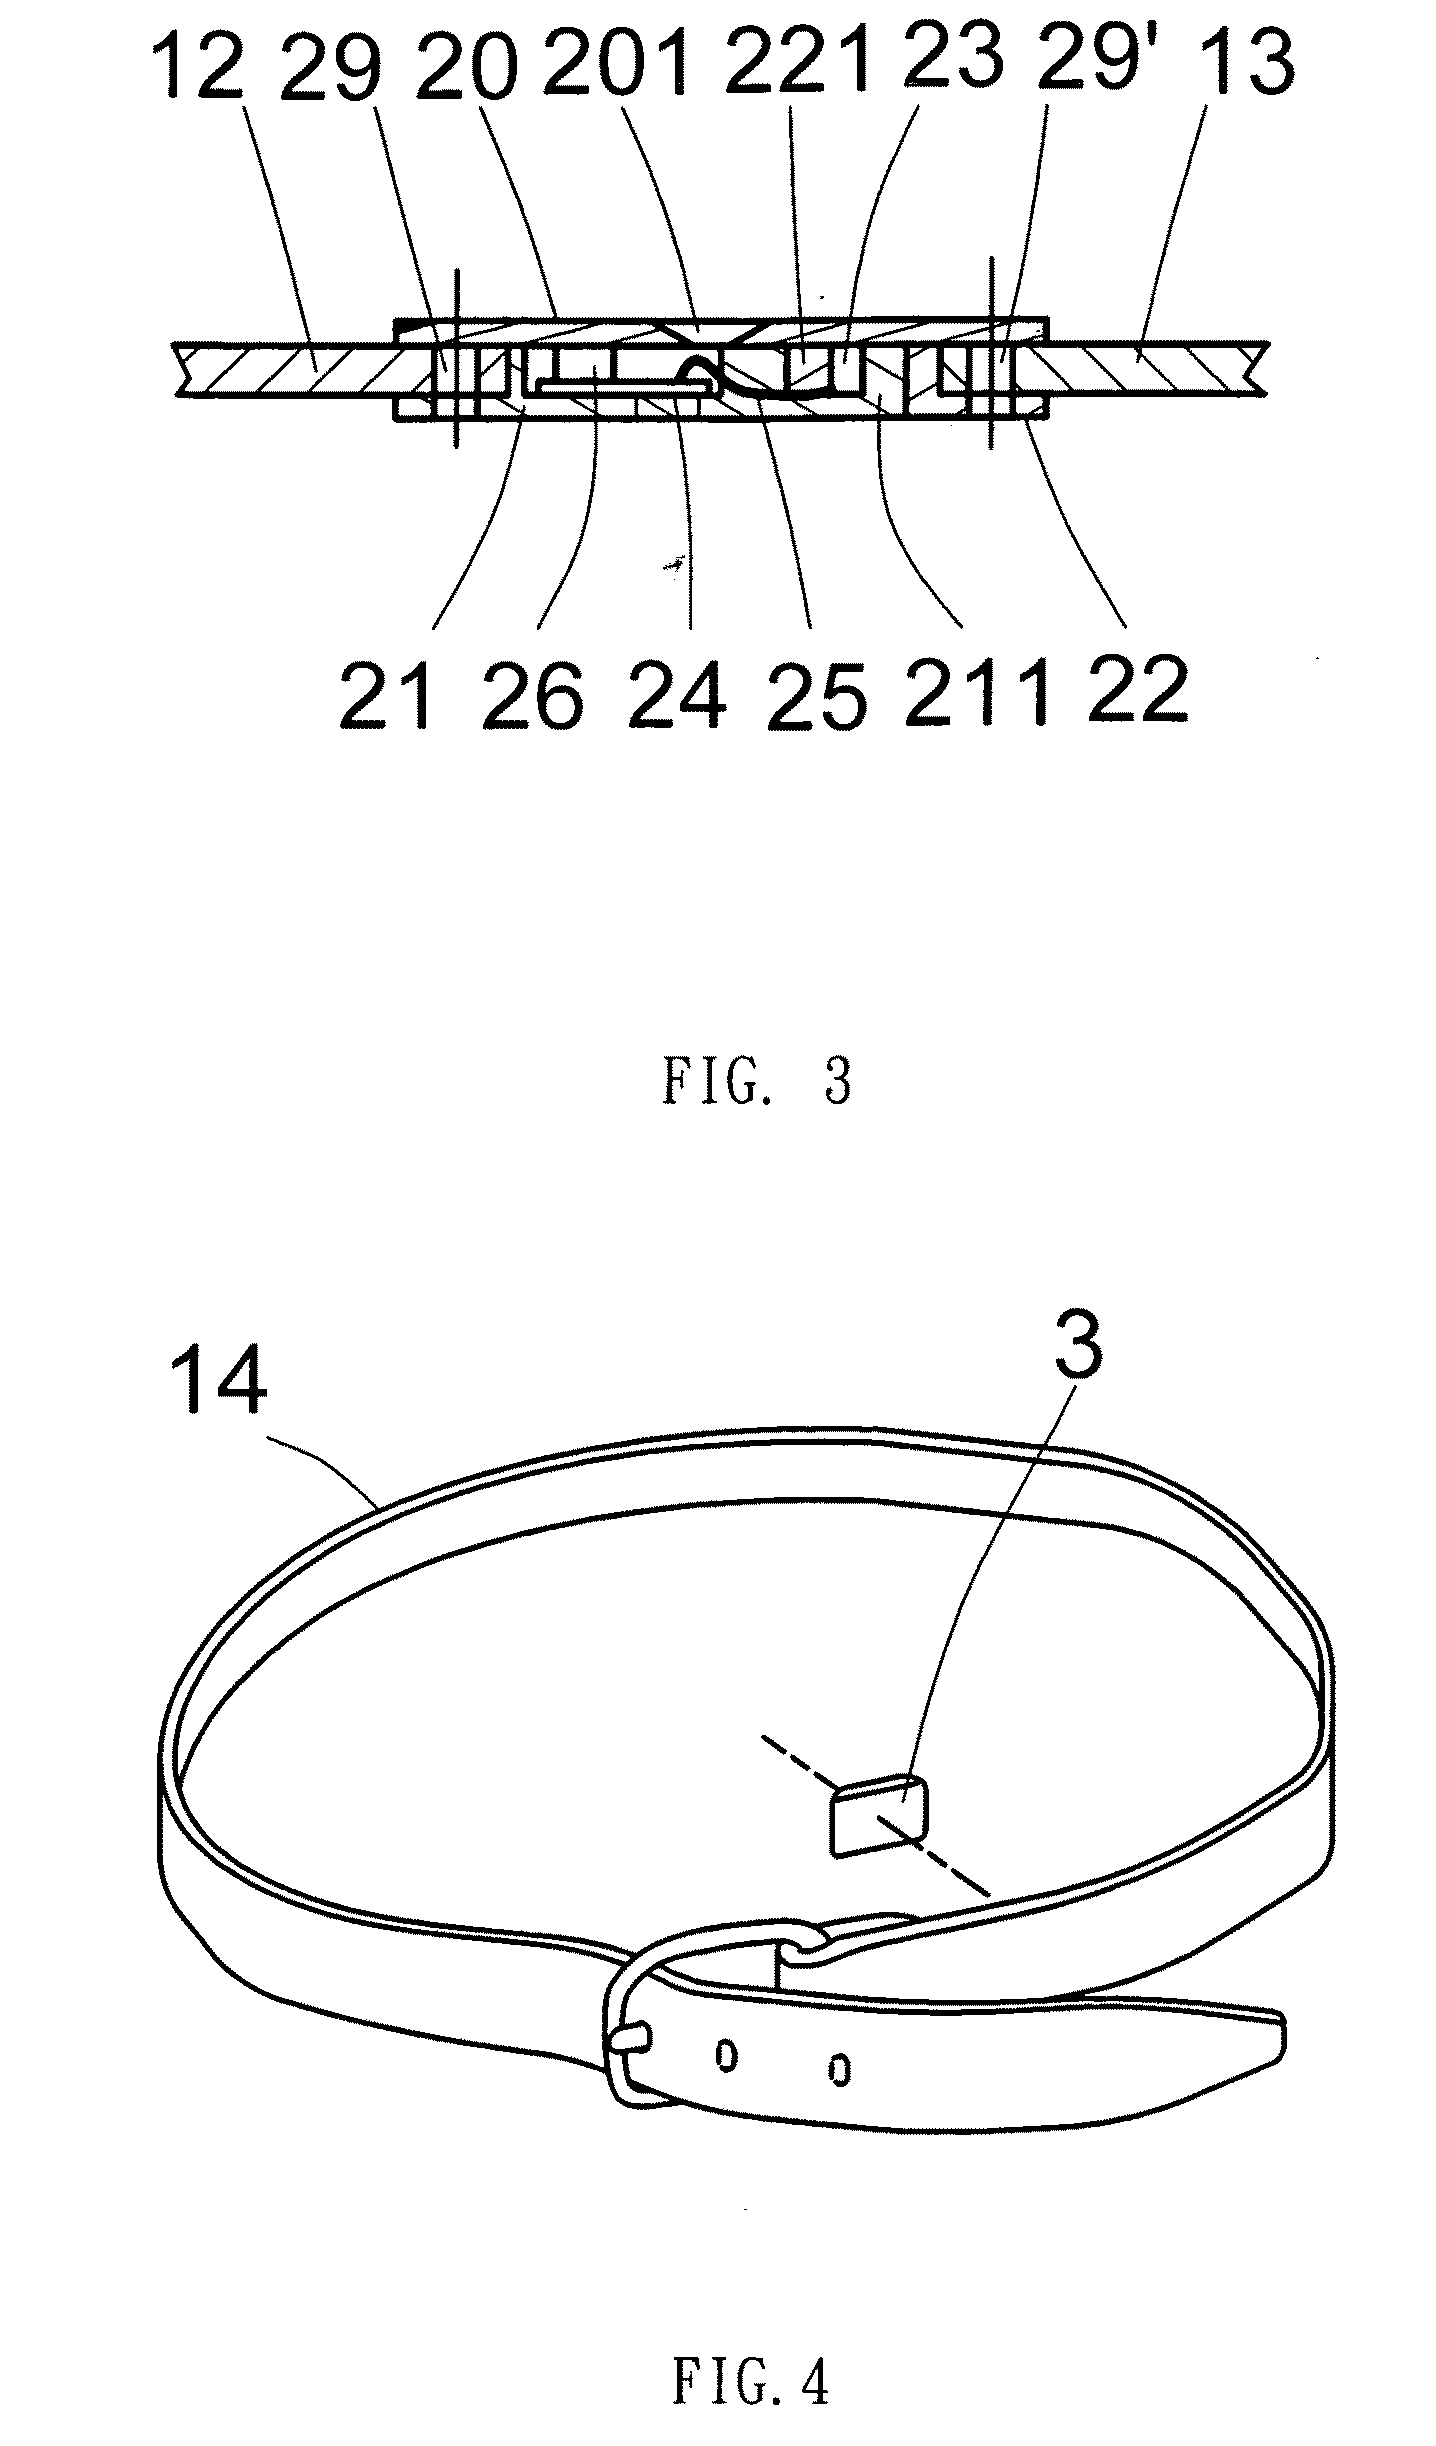 Belt integrated with stress sensing and output reaction